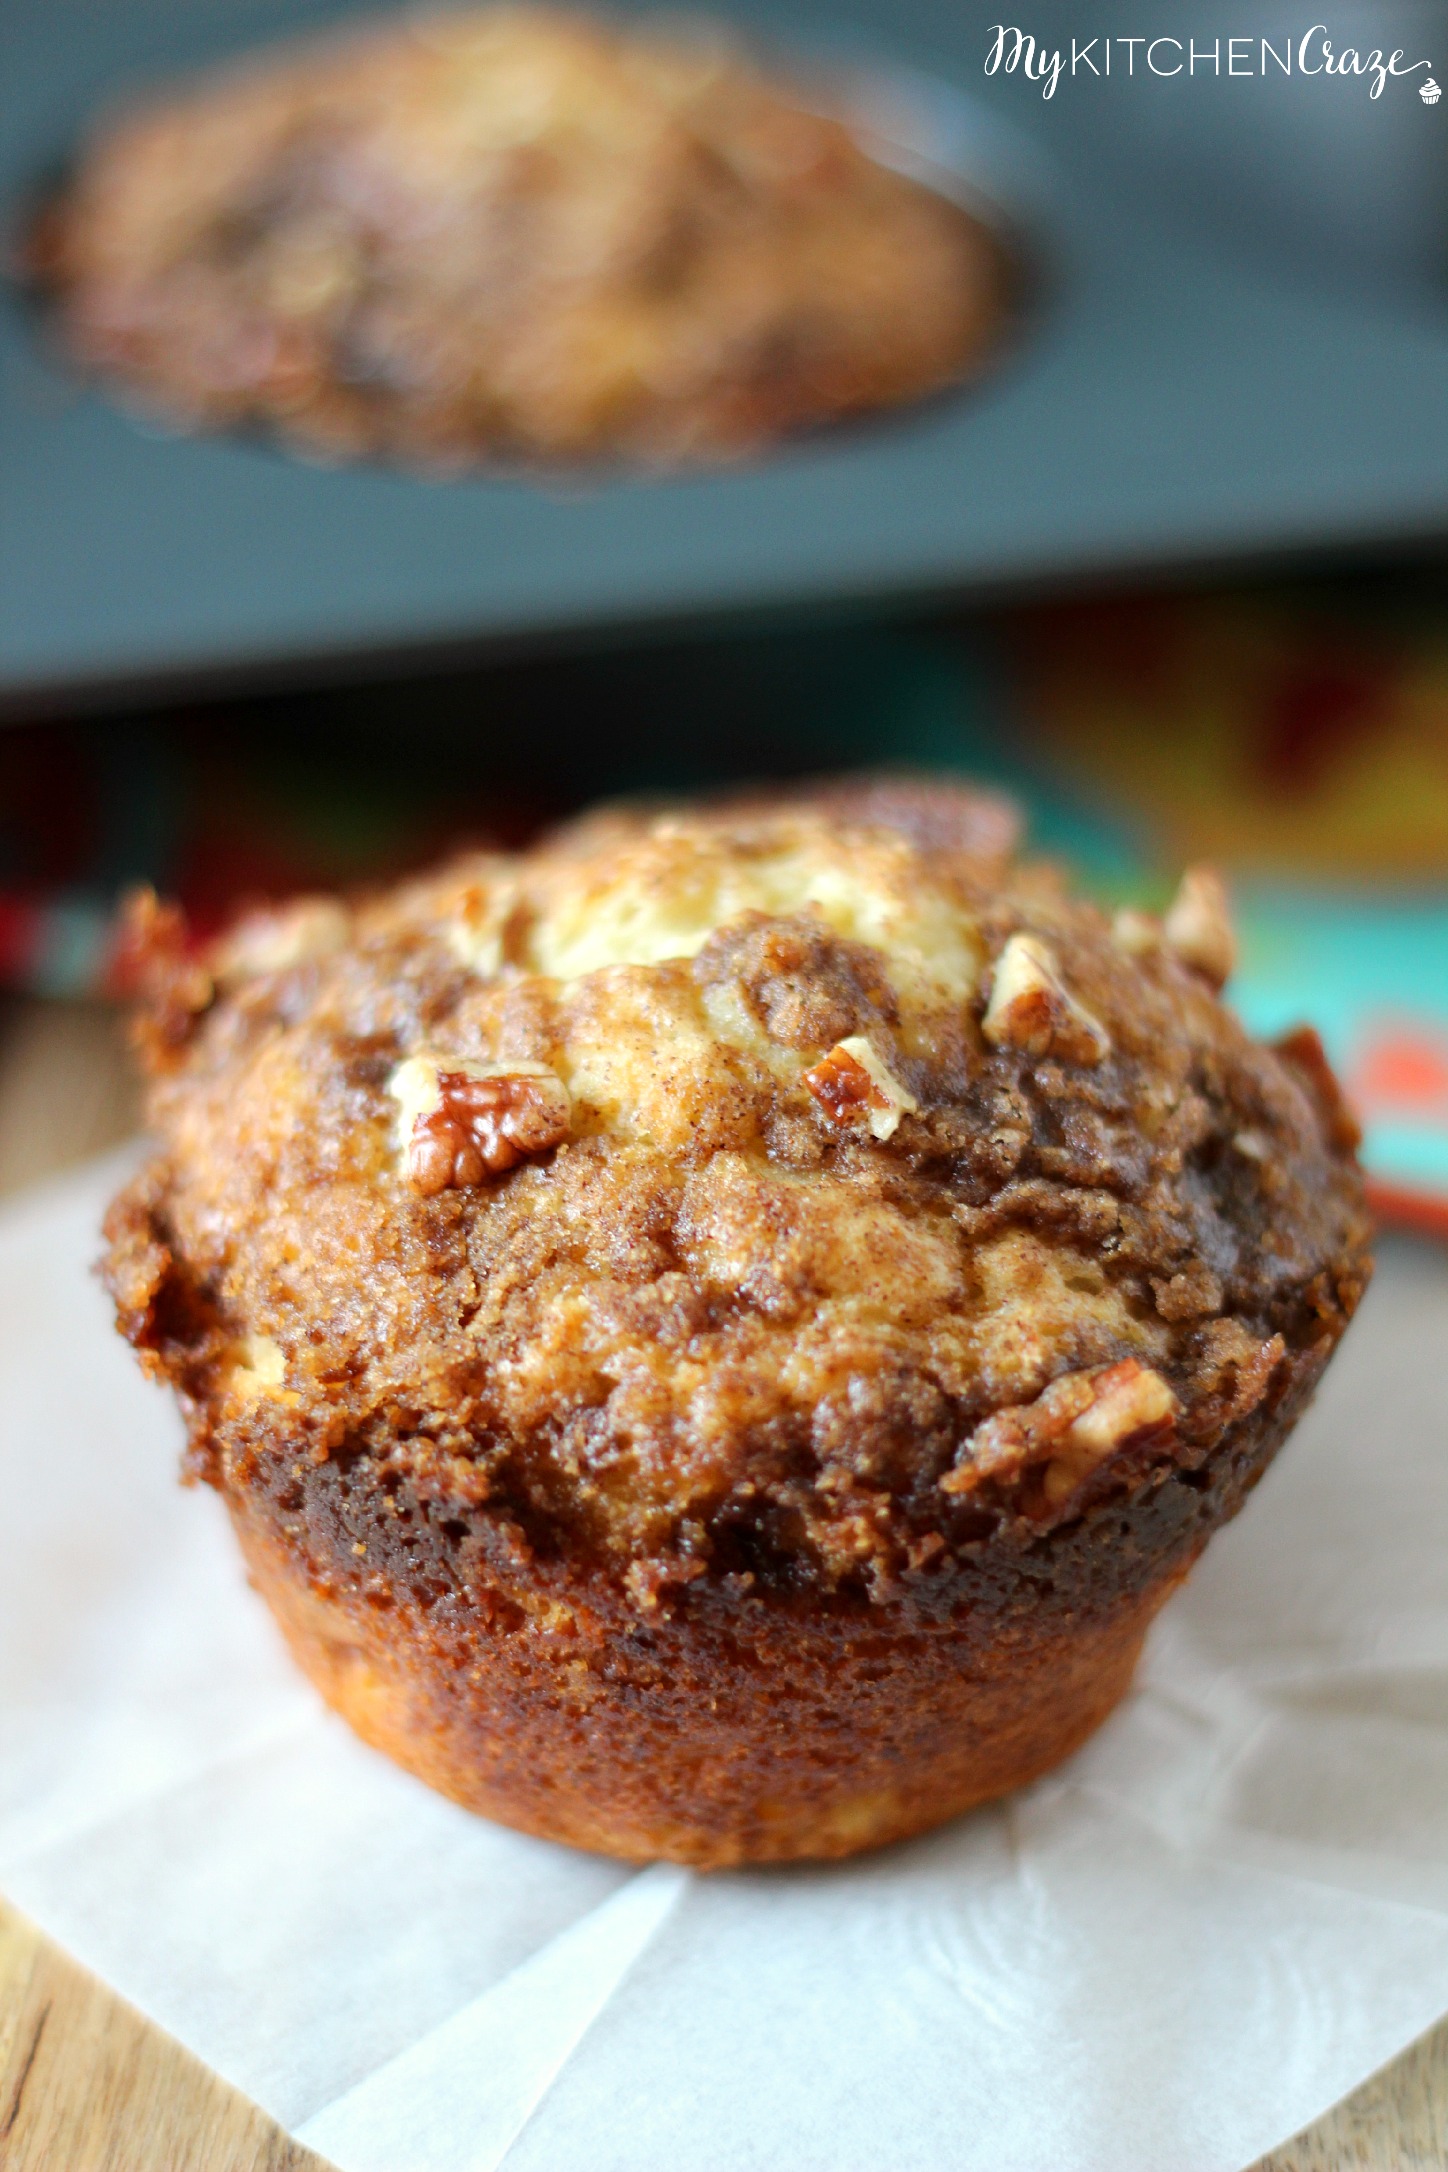 Banana Bread Crumb Muffins l My Kitchen Craze l Perfect for breakfast and those busy mornings!